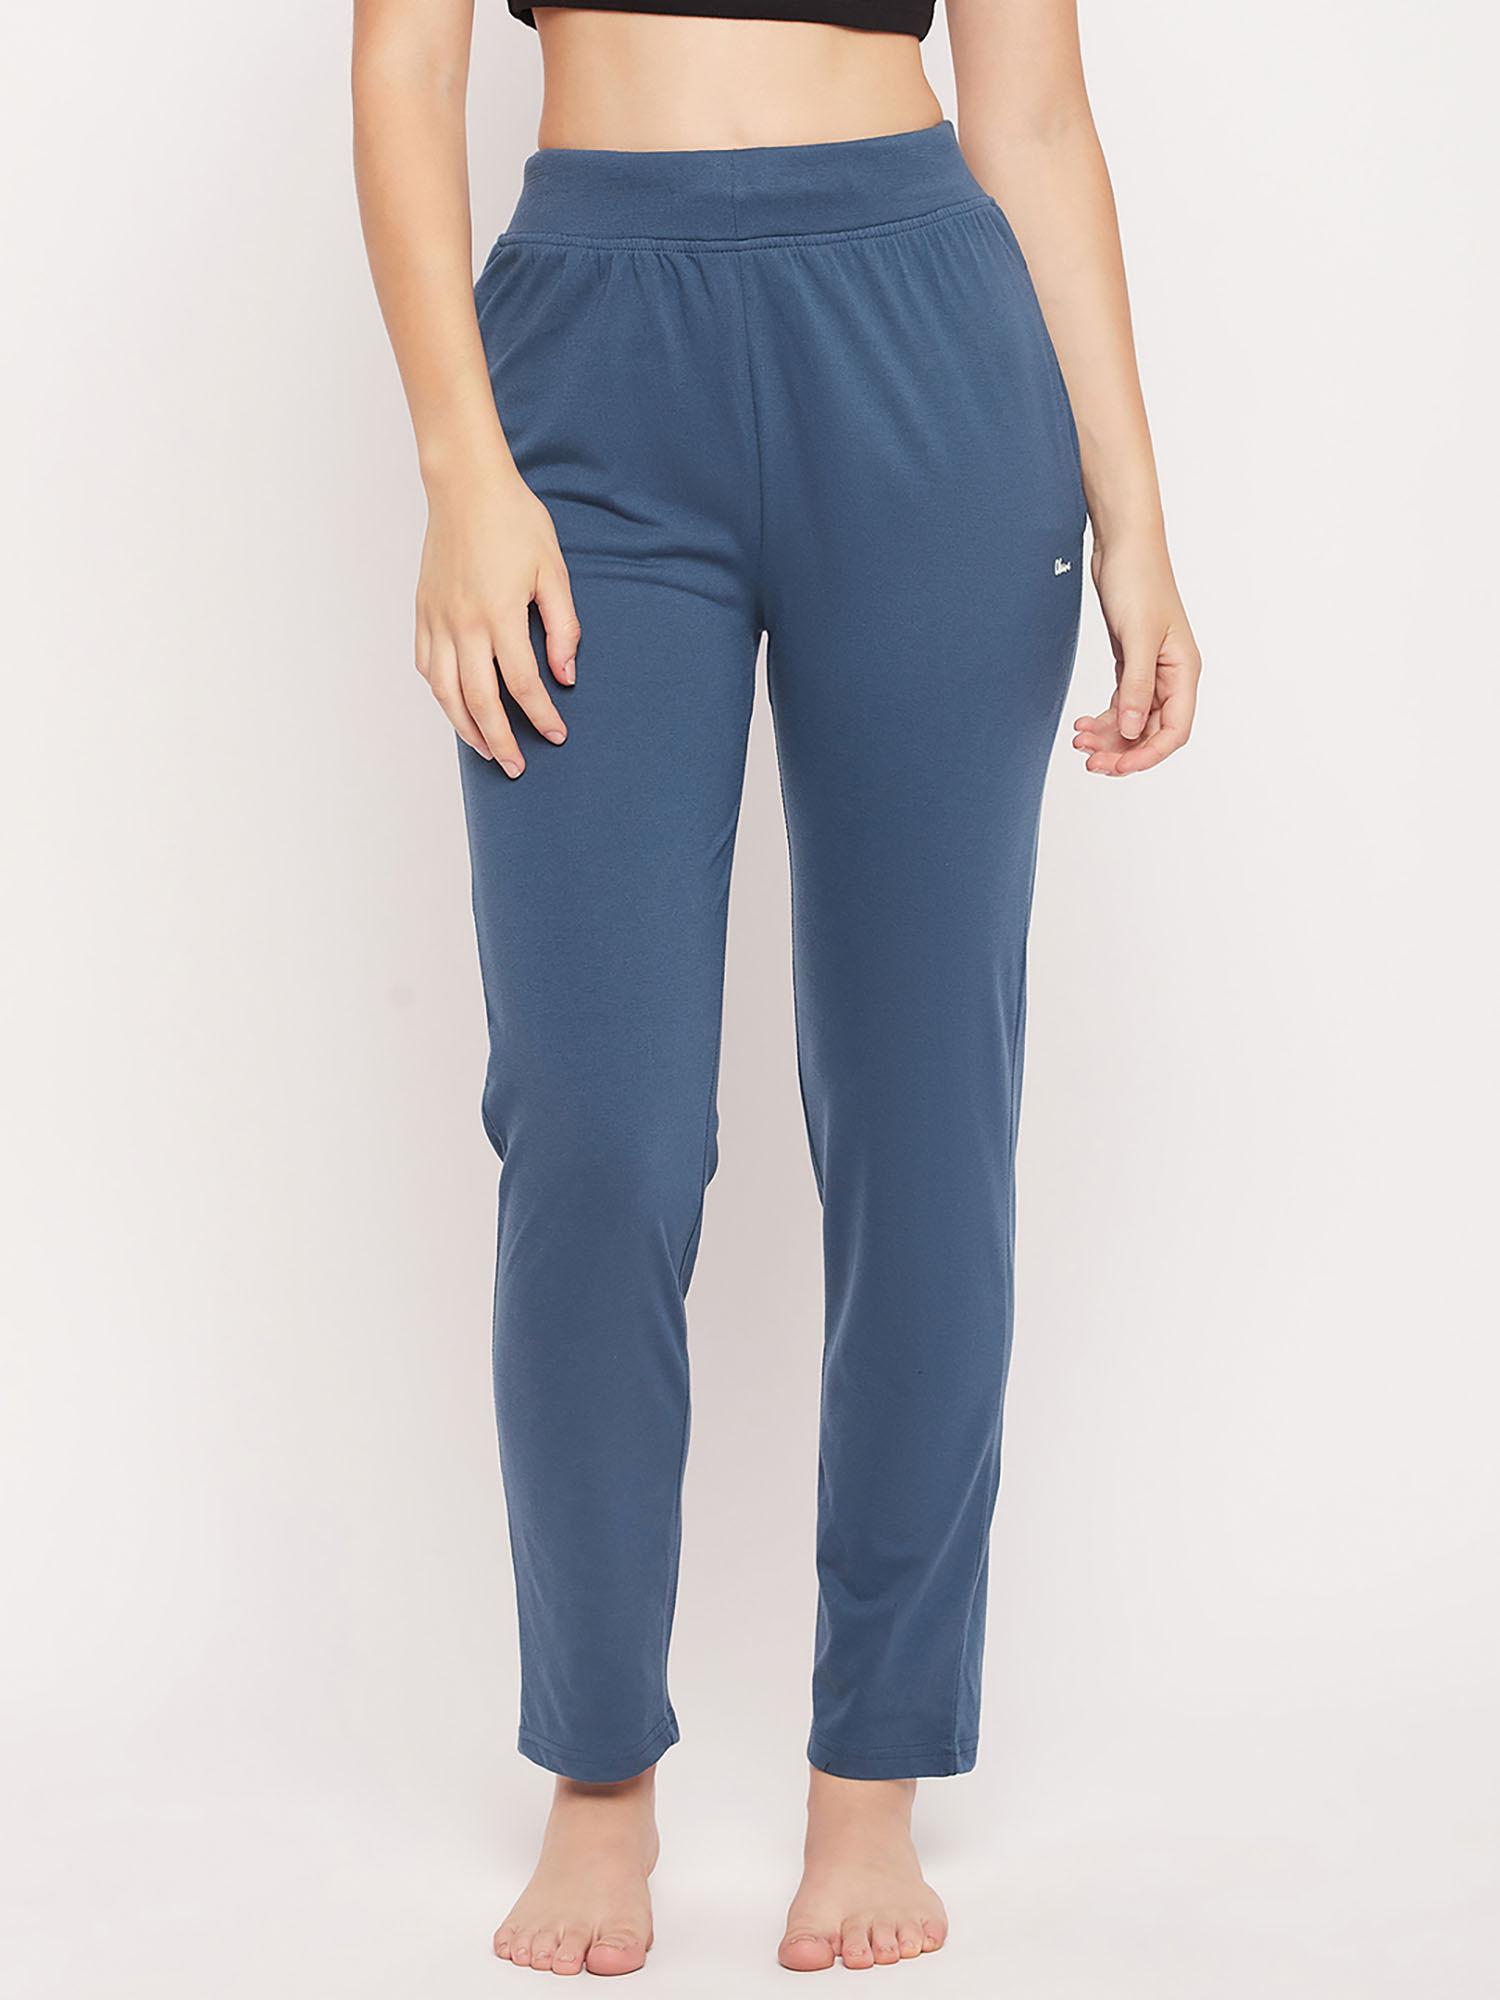 womensolid blue pant